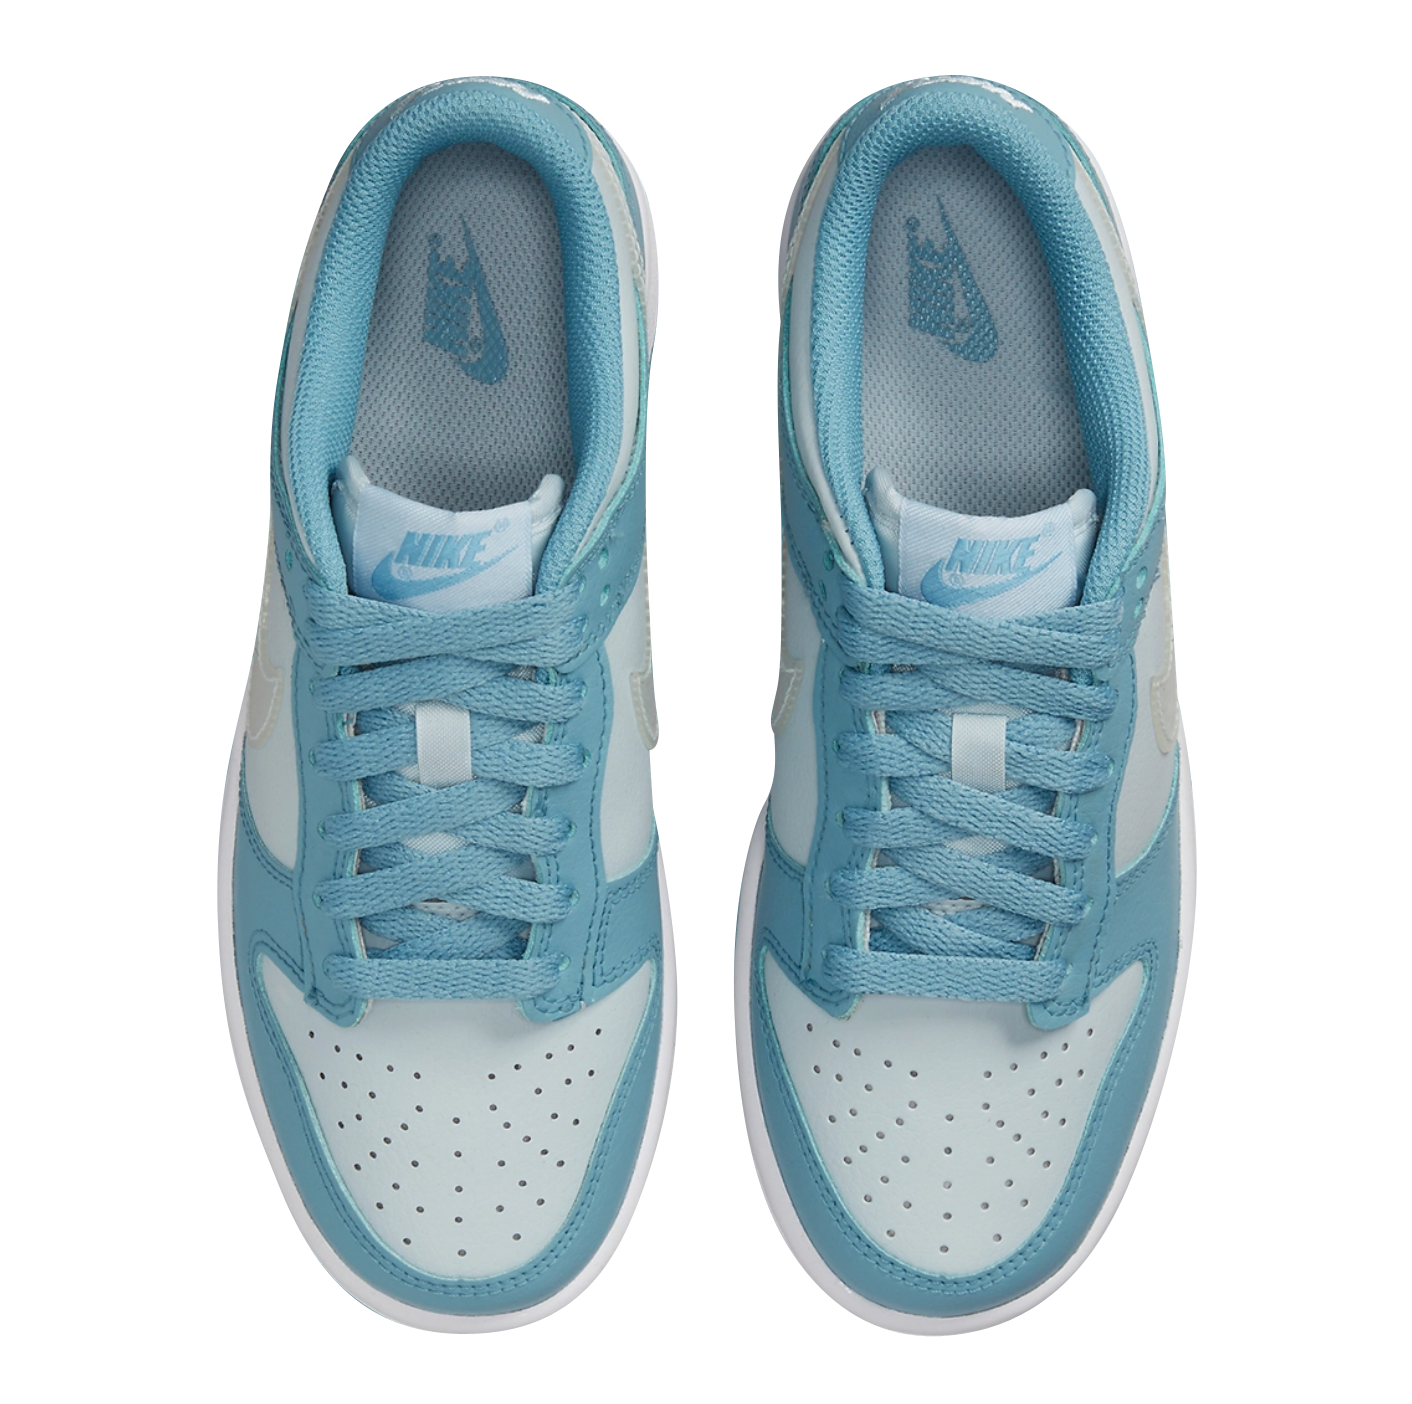 Nike Dunk Low GS Grey Blue DH9765-401